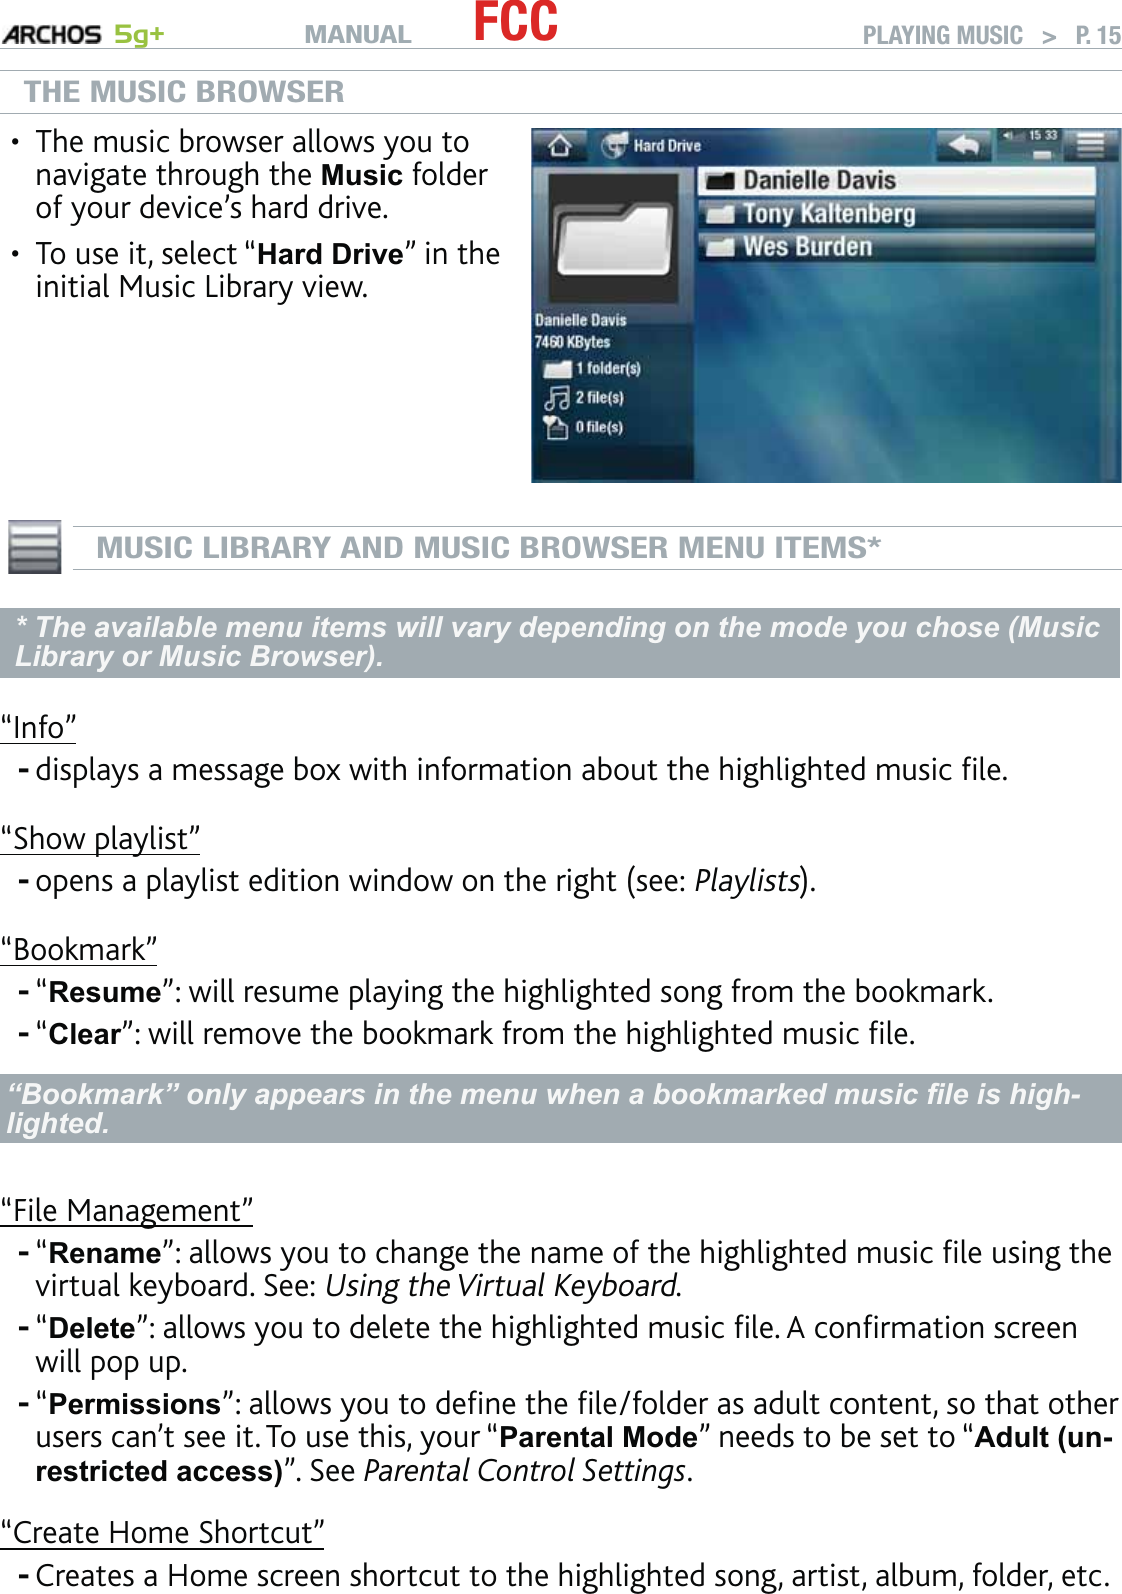 MANUAL 5g+ FCC PLAYING MUSIC   &gt;   P. 15THE MUSIC BROWSERThe music browser allows you to navigate through the Music folder of your device’s hard drive. To use it, select “Hard Drive” in the initial Music Library view.•• MUSIC LIBRARY AND MUSIC BROWSER MENU ITEMS** The available menu items will vary depending on the mode you chose (Music Library or Music Browser).“Info”displays a message box with information about the highlighted music ﬁle.“Show playlist”opens a playlist edition window on the right (see: Playlists).“Bookmark”“Resume”: will resume playing the highlighted song from the bookmark.“Clear”: will remove the bookmark from the highlighted music ﬁle.“Bookmark” only appears in the menu when a bookmarked music ﬁle is high-lighted.“File Management”“Rename”: allows you to change the name of the highlighted music ﬁle using the virtual keyboard. See: Using the Virtual Keyboard.“Delete”: allows you to delete the highlighted music ﬁle. A conﬁrmation screen will pop up.“Permissions”: allows you to deﬁne the ﬁle/folder as adult content, so that other users can’t see it. To use this, your “Parental Mode” needs to be set to “Adult (un-restricted access)”. See Parental Control Settings.“Create Home Shortcut”Creates a Home screen shortcut to the highlighted song, artist, album, folder, etc.--------